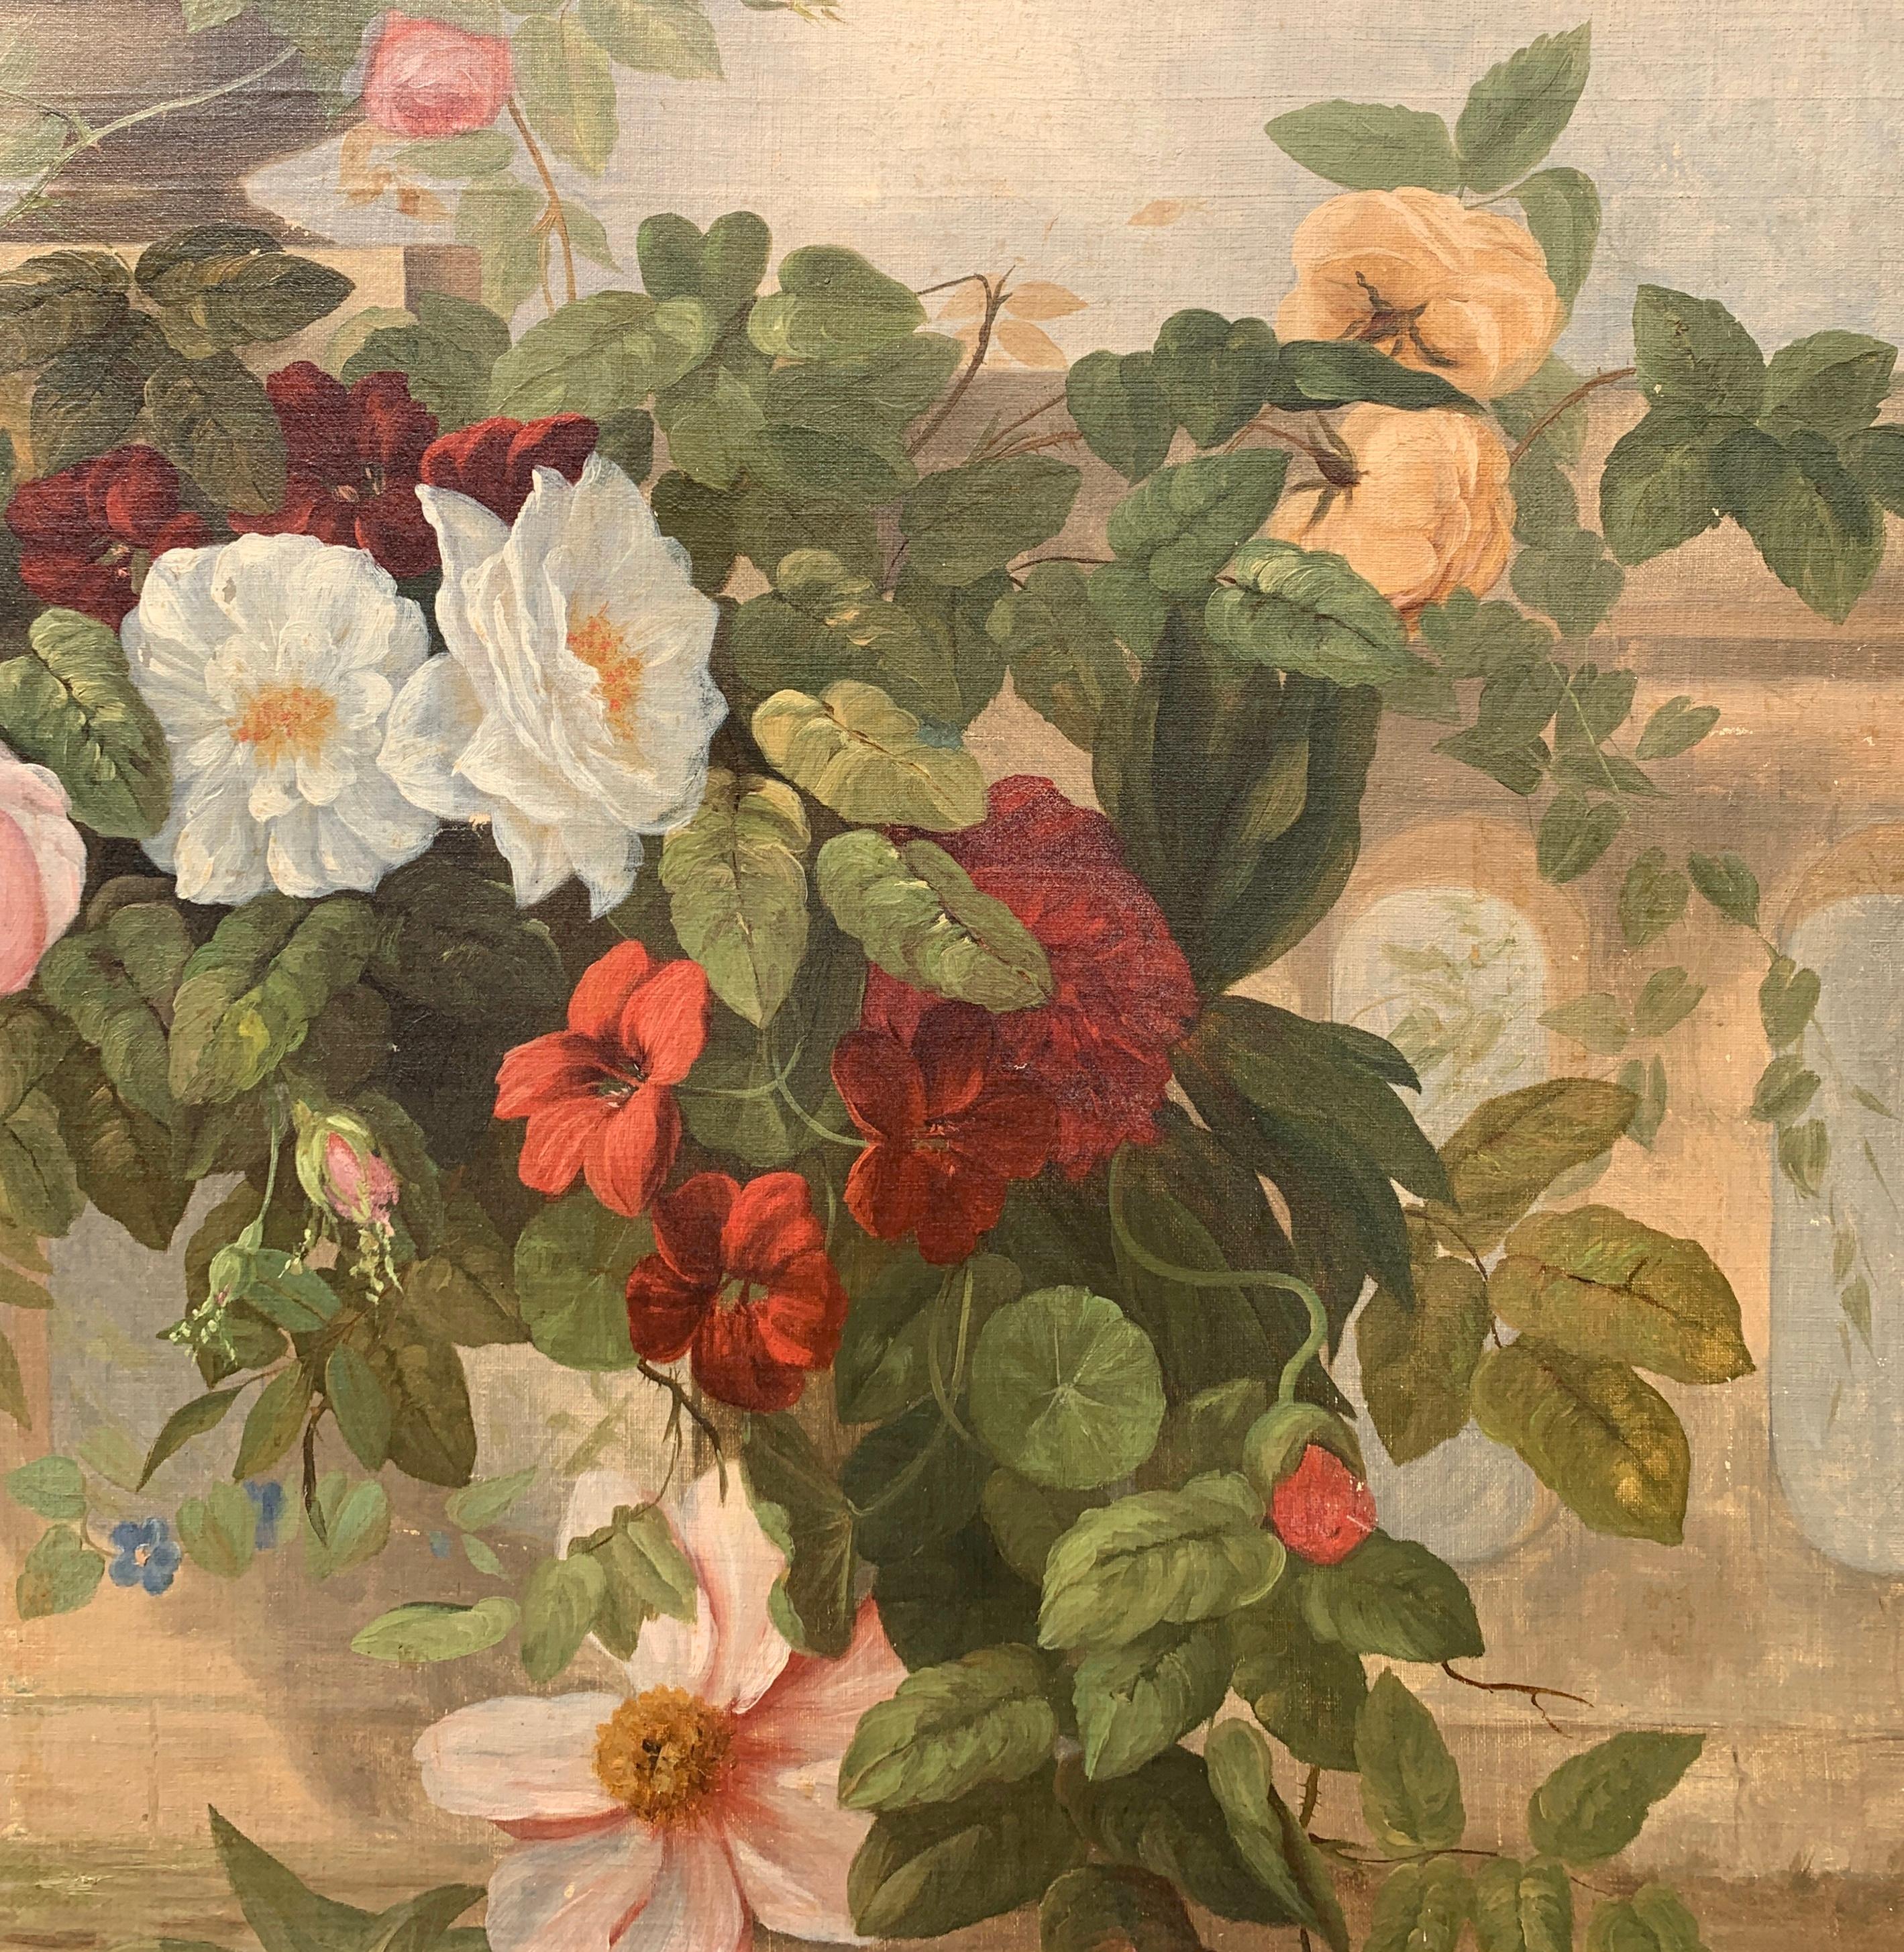 Italian painter (19th-20th century) - Still life of flowers.

65 x 79 cm without frame, 73.5 x 88.5 cm with frame.

Antique oil painting on canvas, in a gilded wooden frame (wooden panel on the back).

Condition report: Original canvas. Good state